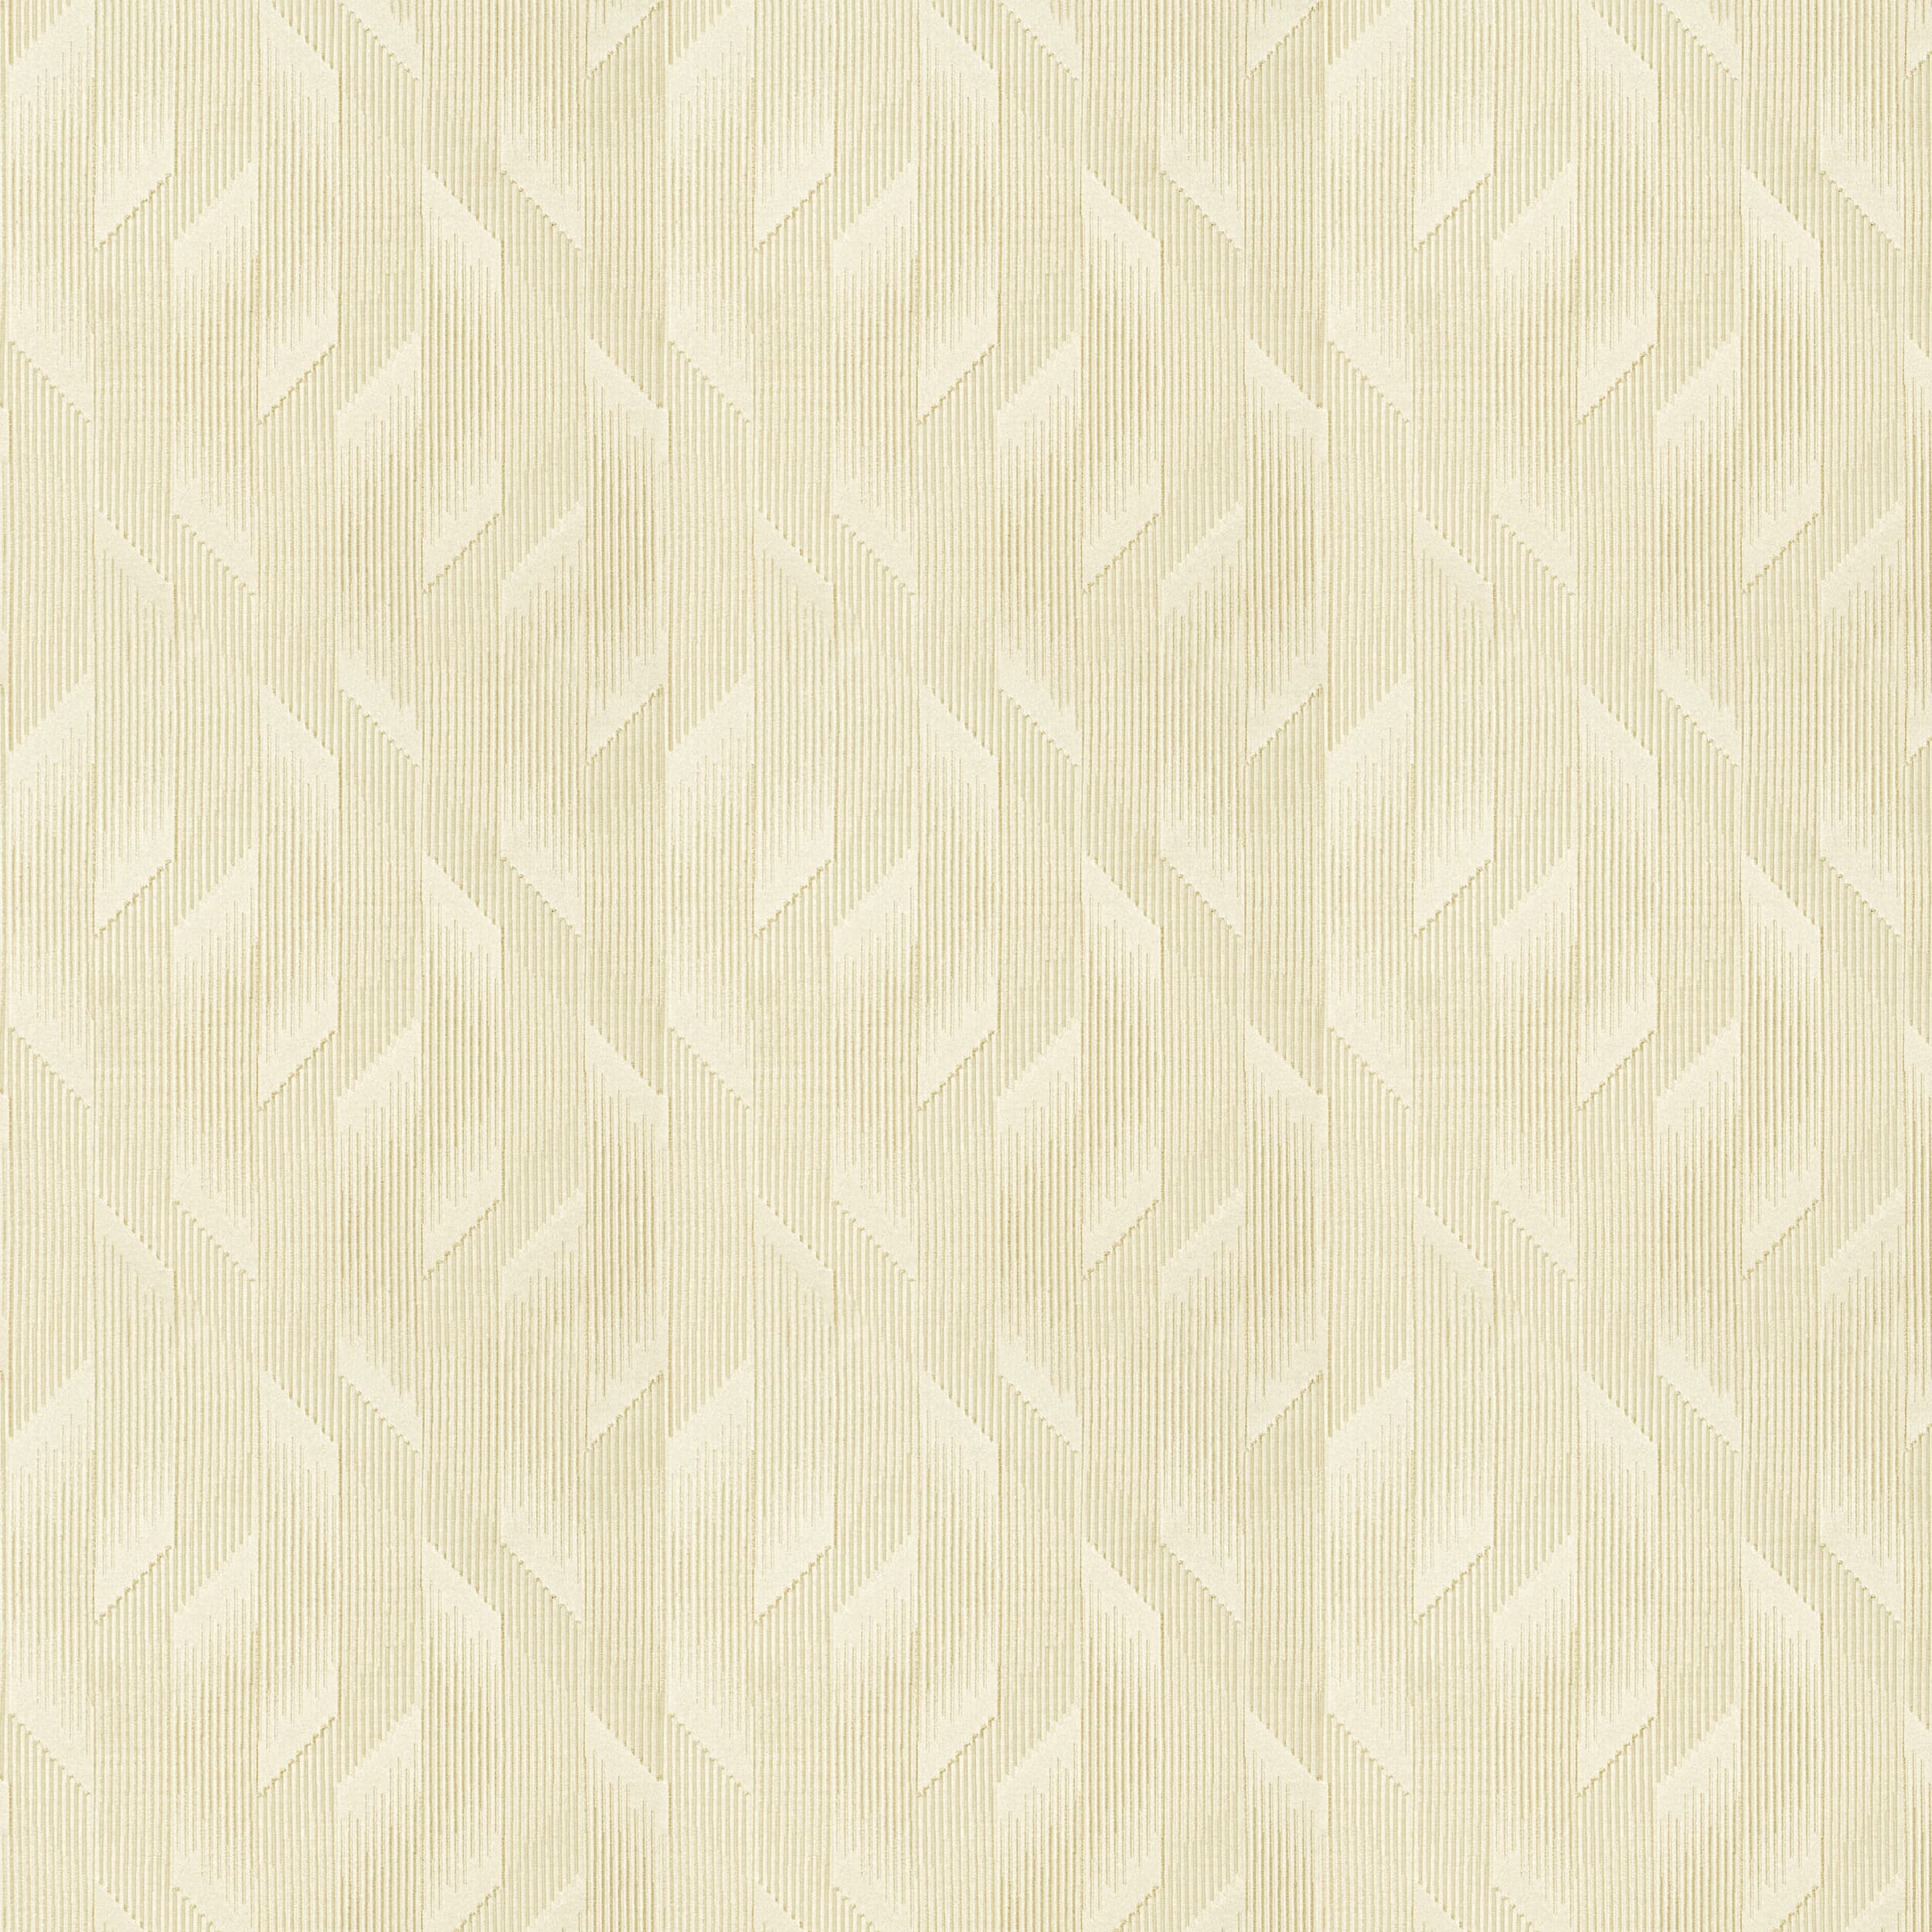 Heather 1 Beige by Stout Fabric